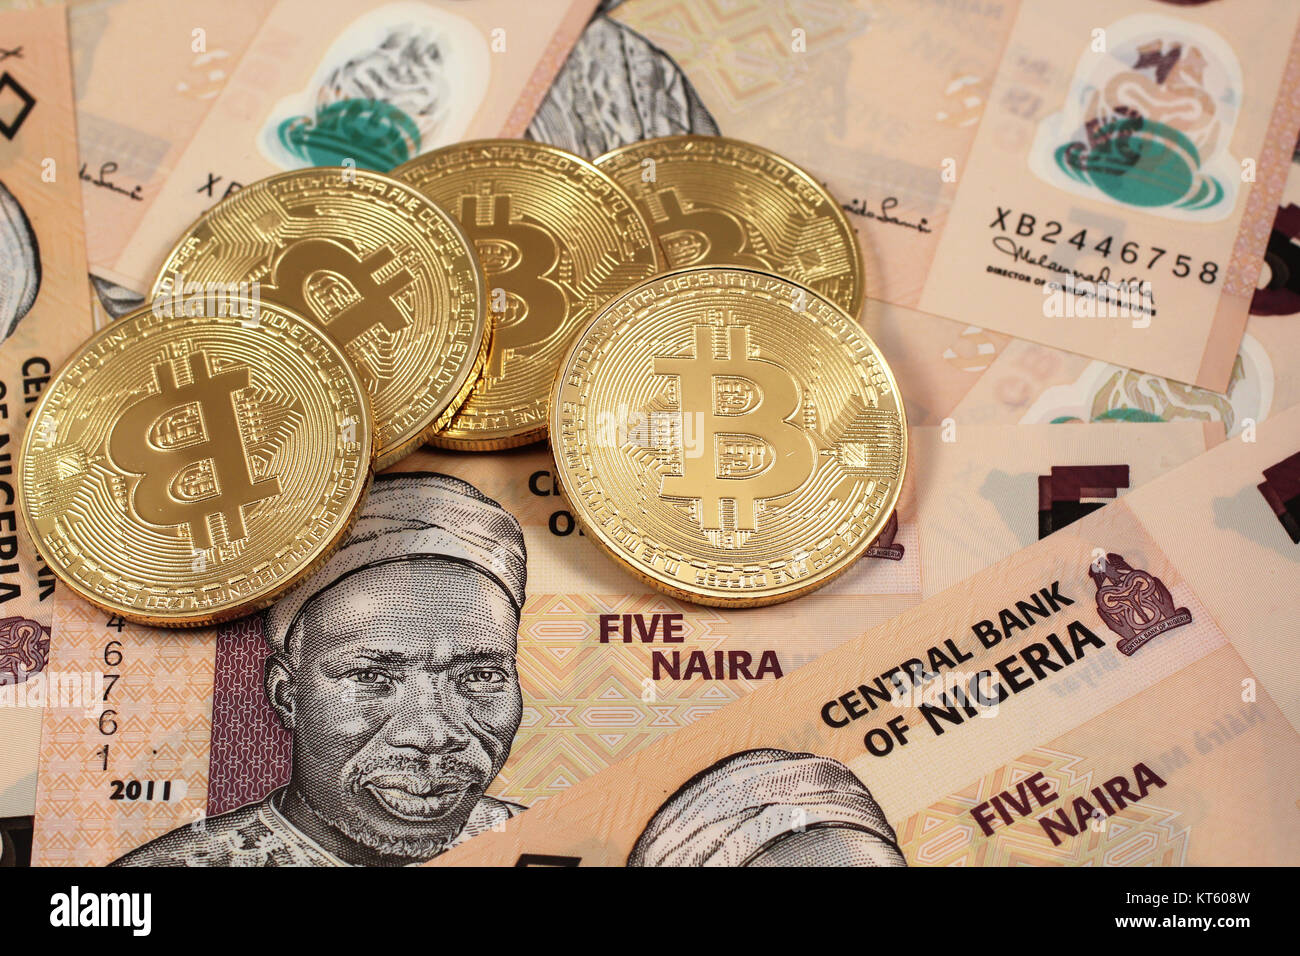 0.00087363 bitcoin to naira eth deal with dogecoin